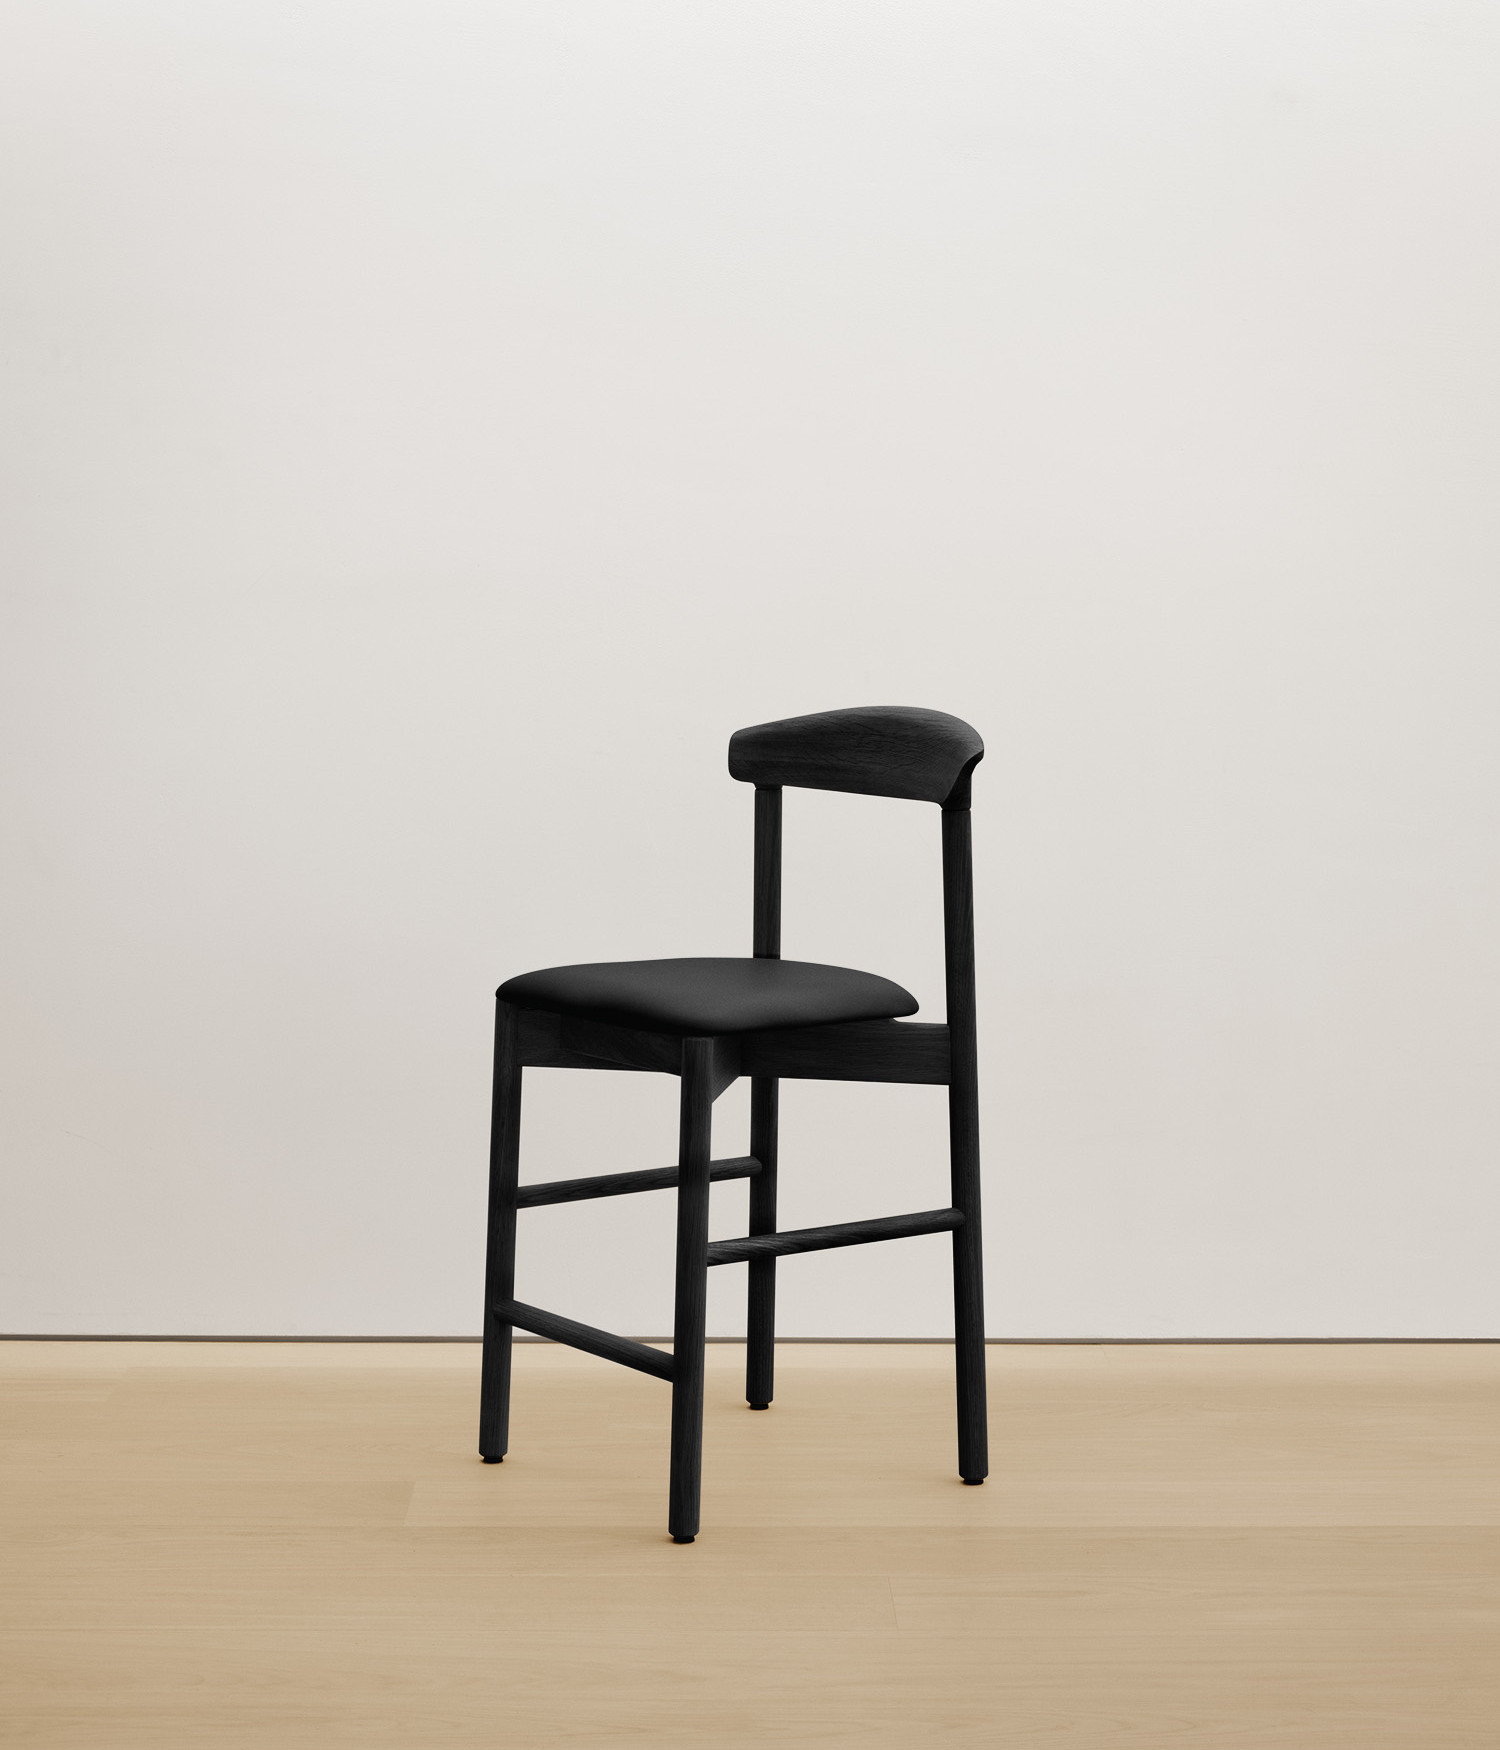  black-stained-oak stool with black color upholstered seat